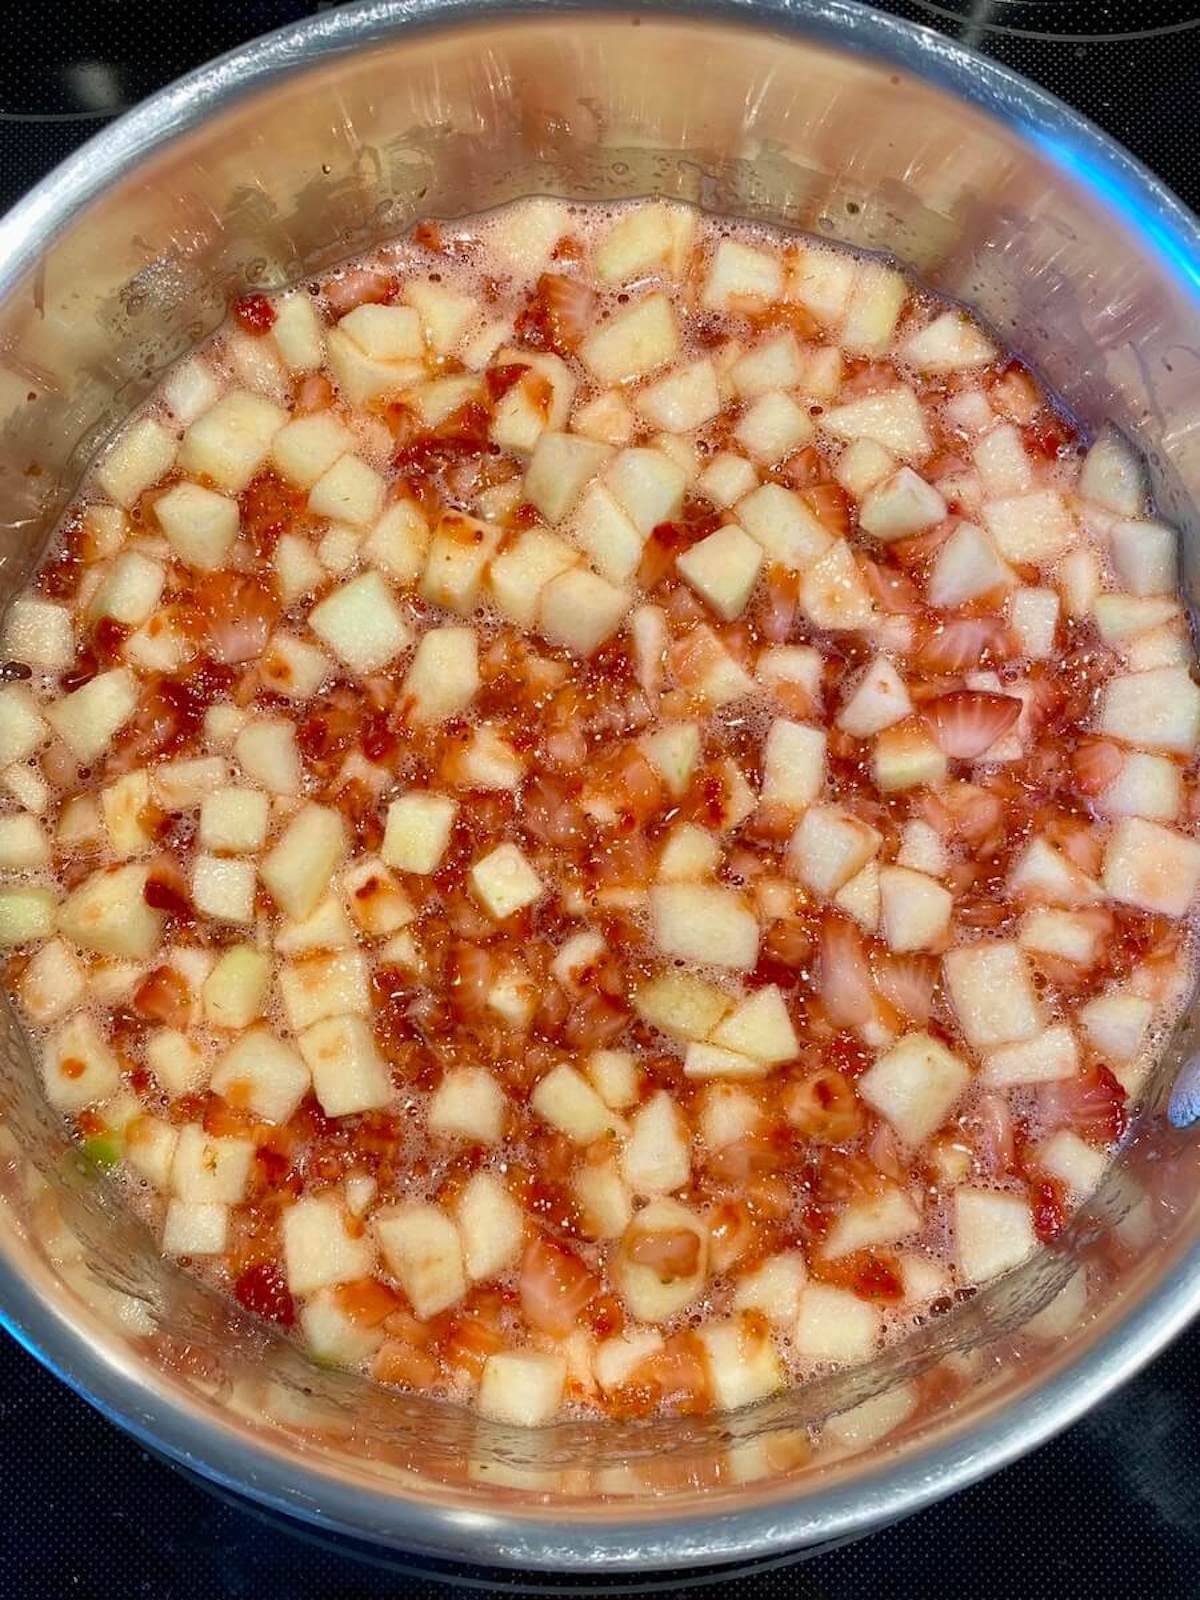 Diced strawberries and apples simmering on the stove.